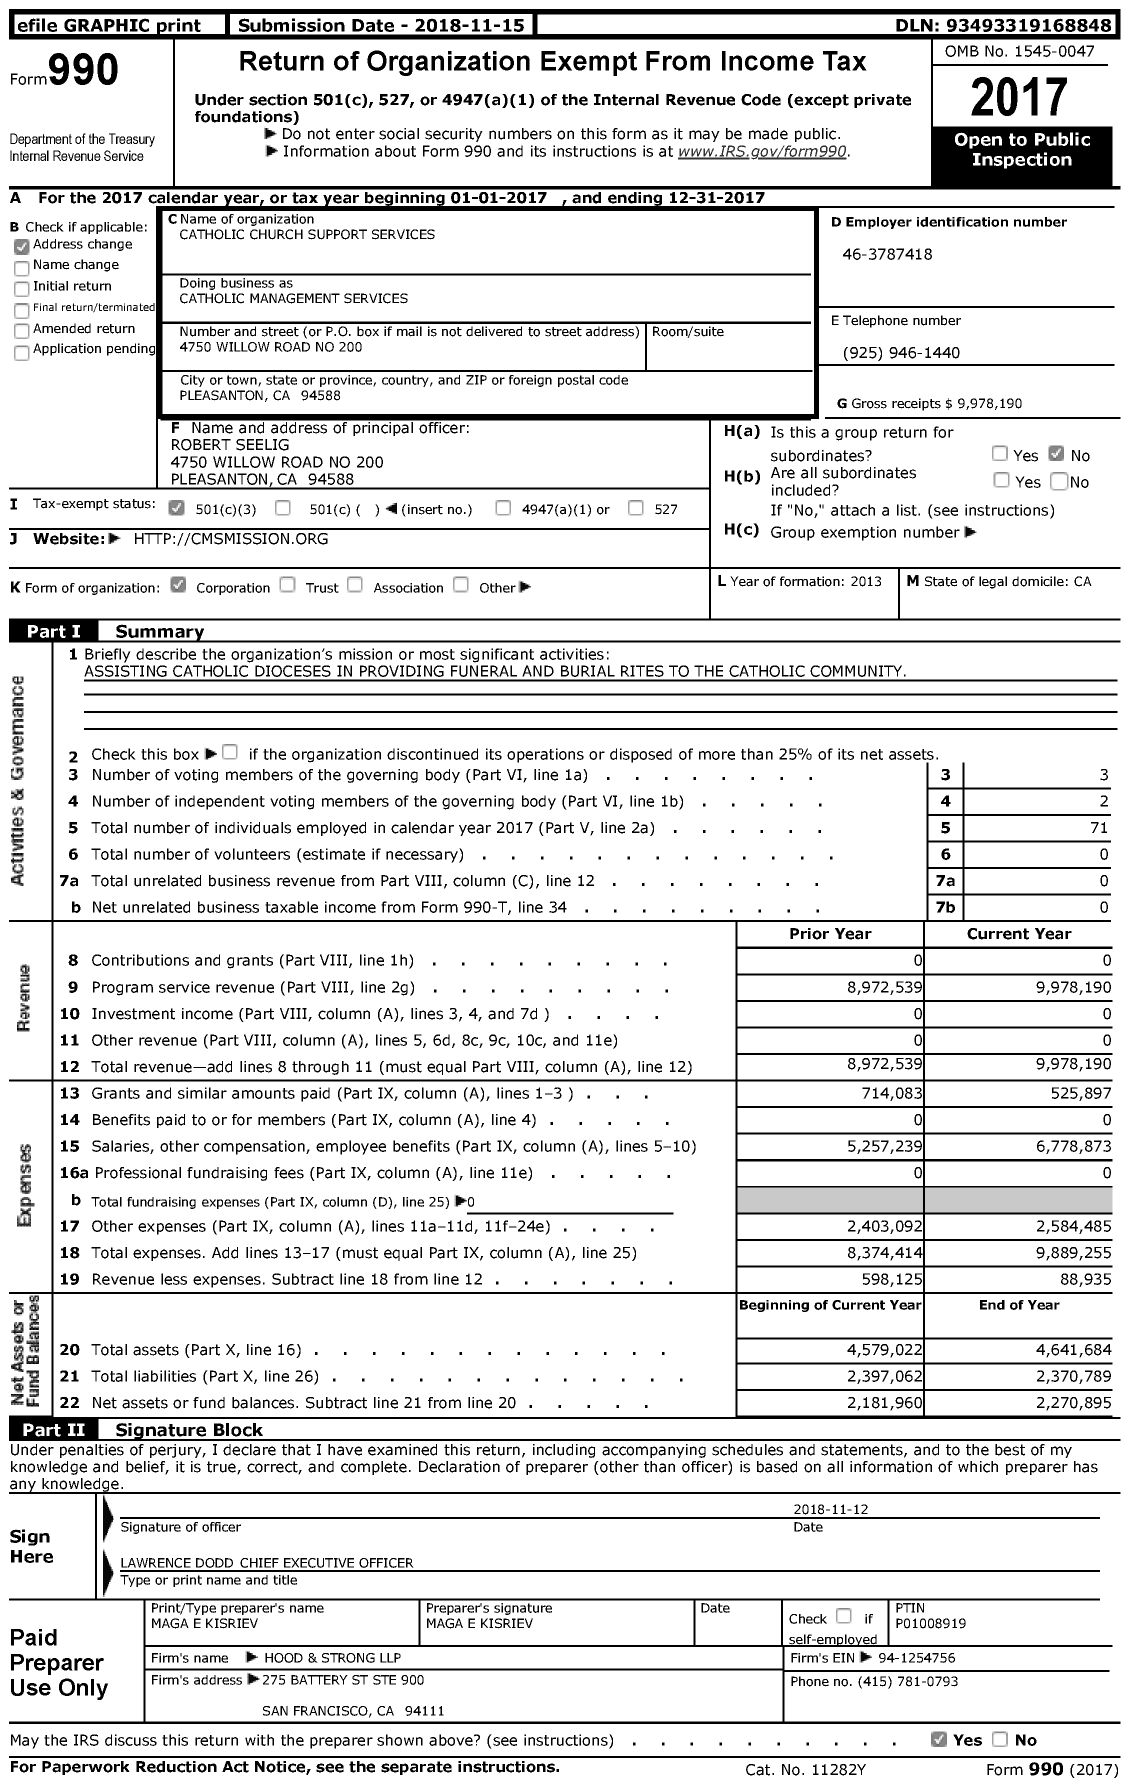 Image of first page of 2017 Form 990 for Catholic Management Services (CMS)